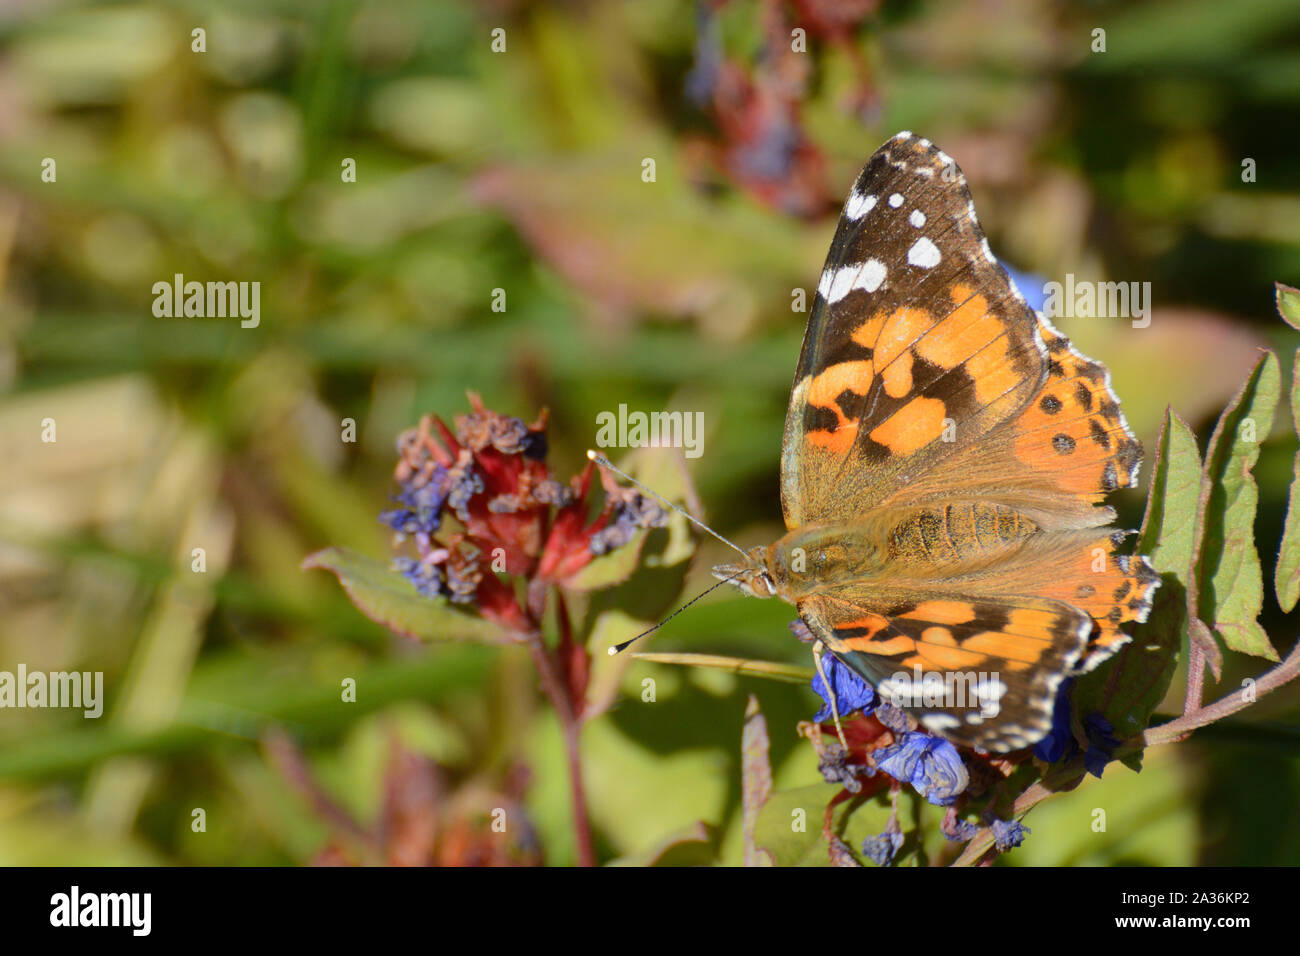 Painted Lady Butterfly or Vanessa cardui on fading autumn blue leadwort flowers or Ceratostigma plumbaginoides Stock Photo